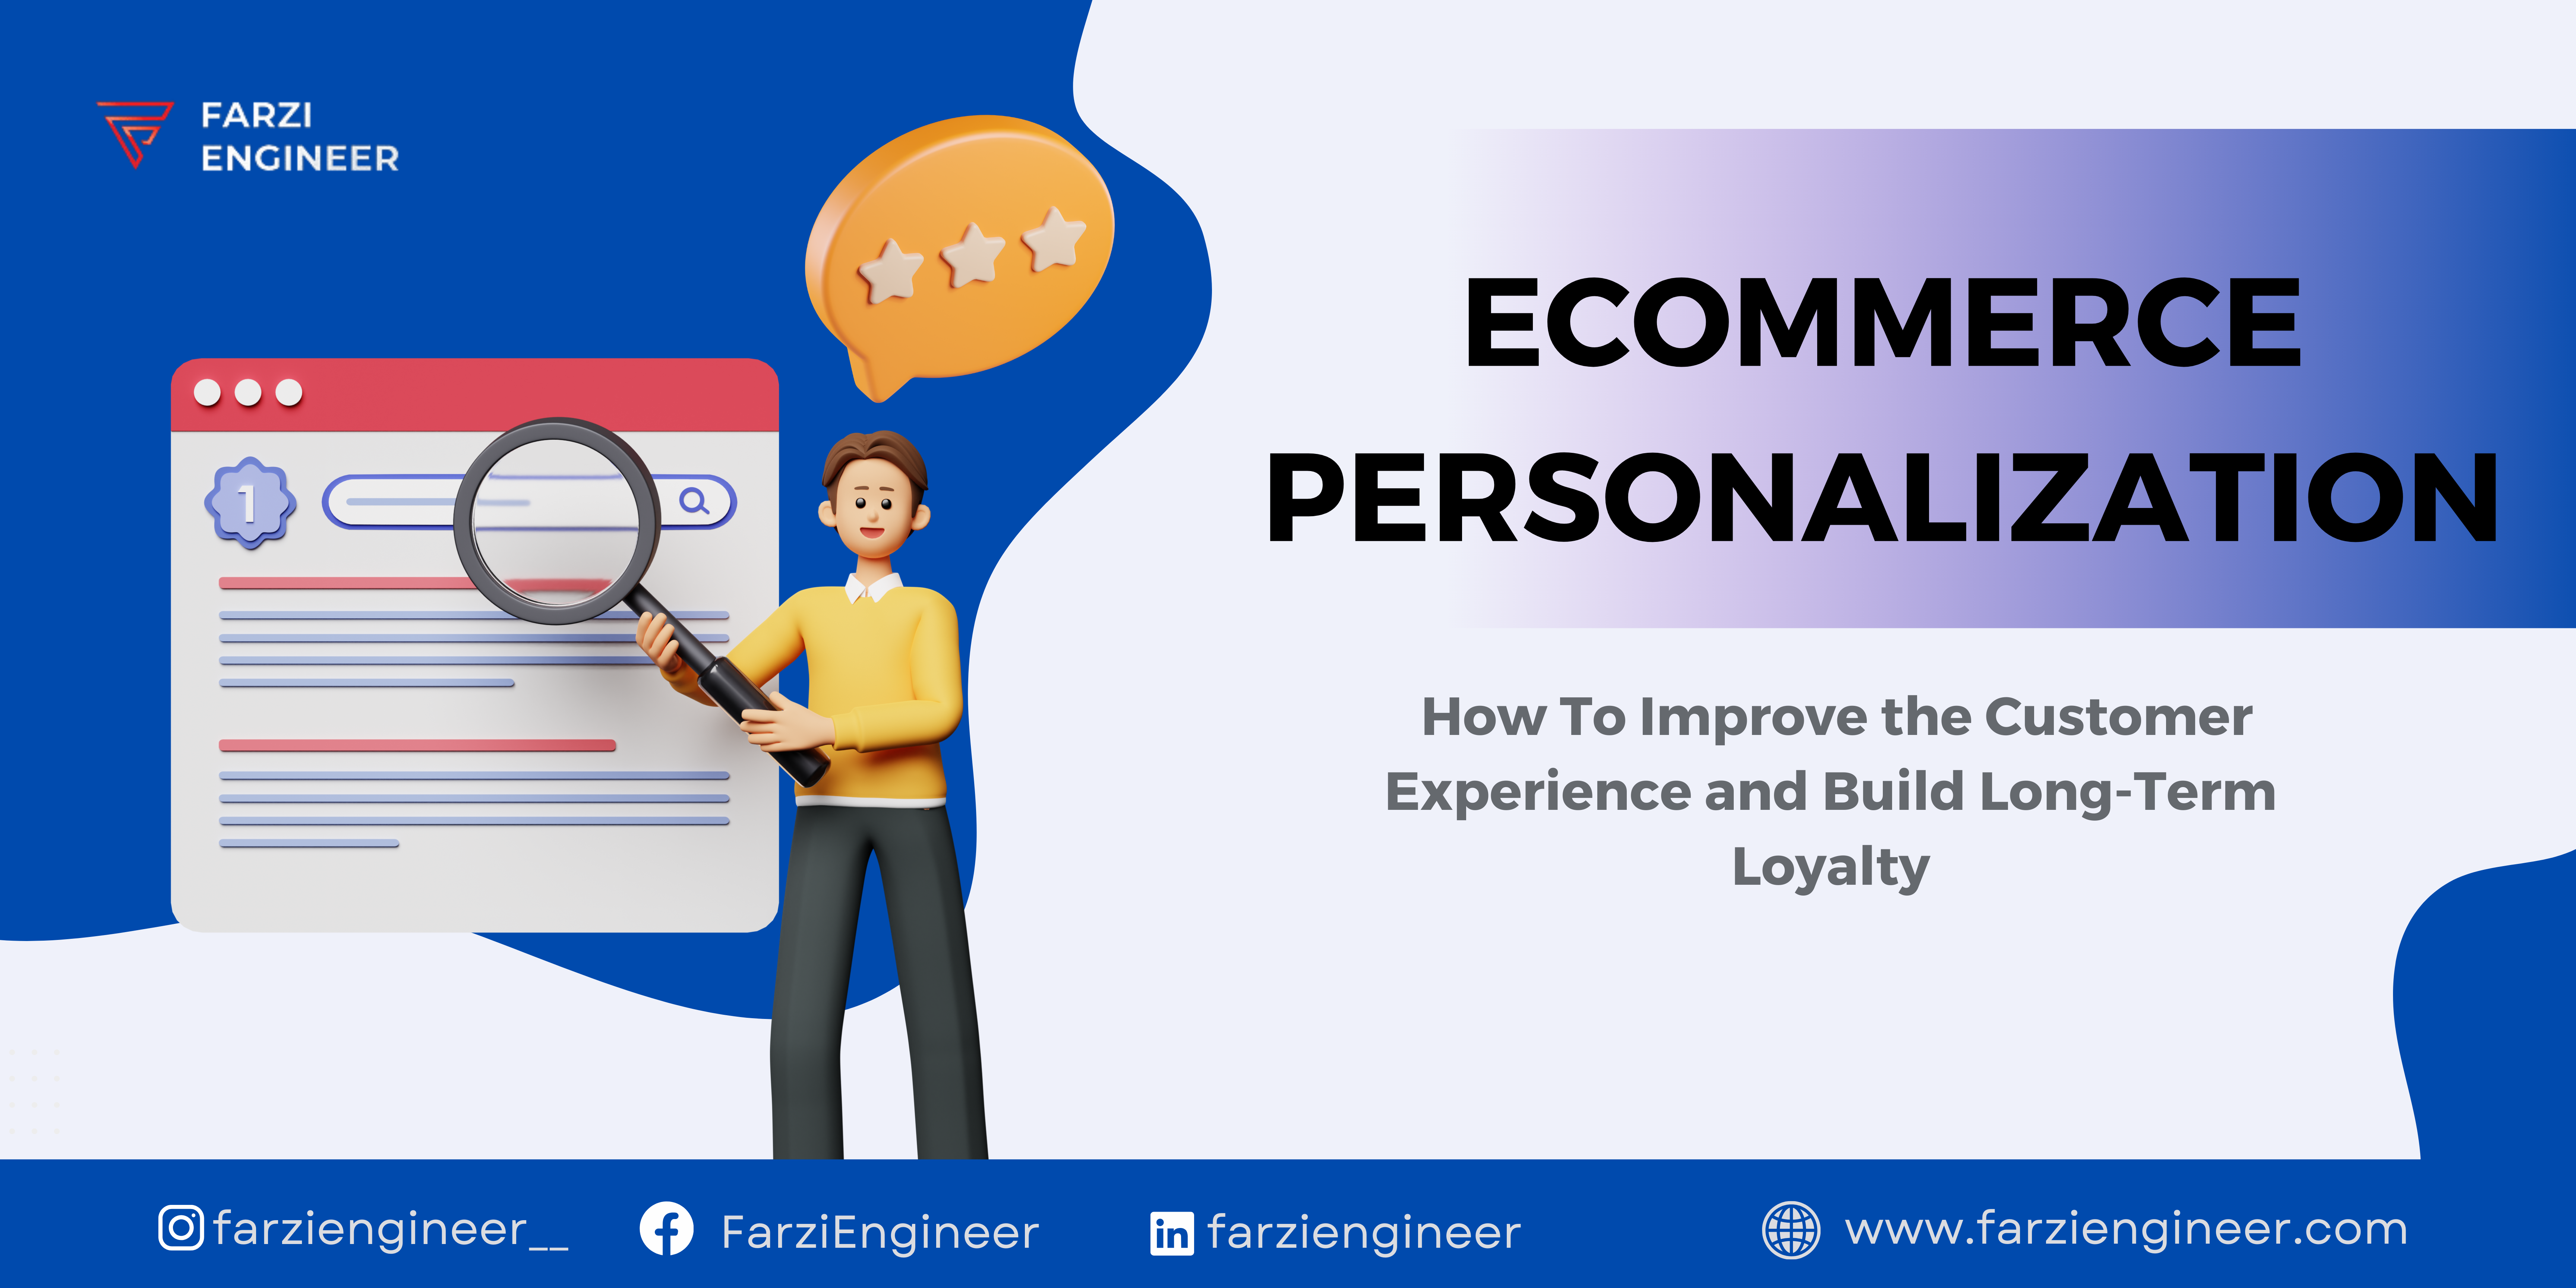 You are currently viewing Ecommerce Personalization: How To Improve the Customer Experience and Build Long-Term Loyalty